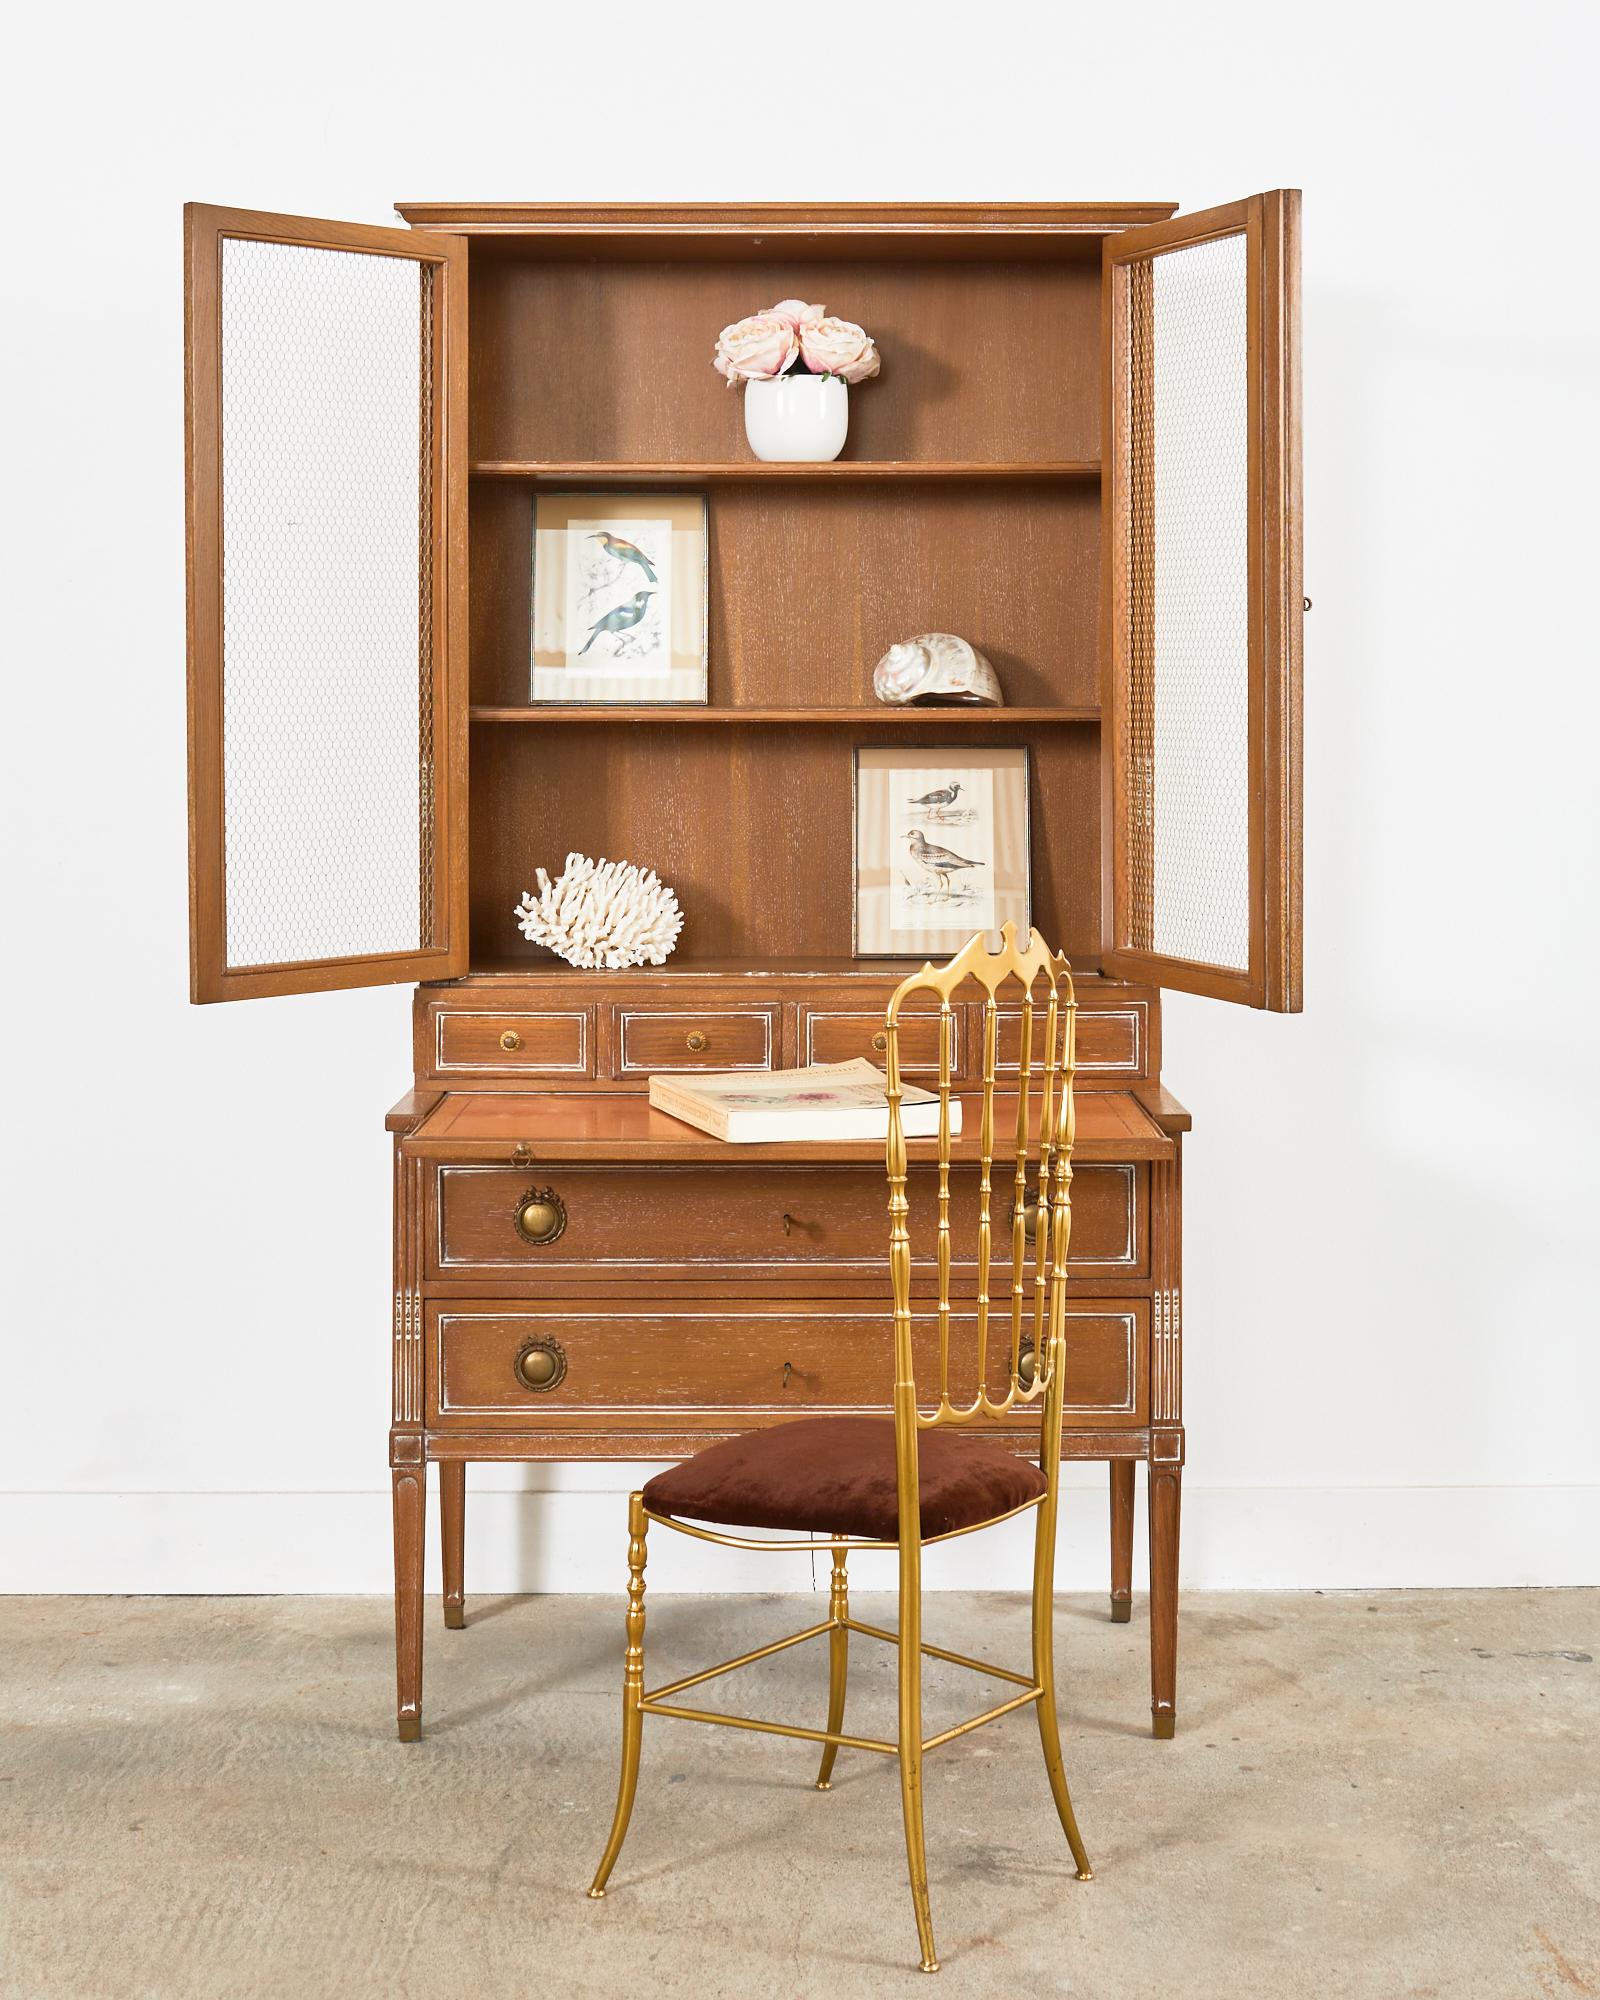 Fabulous French secretaire bookcase featuring a pull-out leather writing table or petite desk. Mid-century 2 part case crafted from oak. The chest is fronted by two large storage drawers with patinated brass ring pulls with a ribbon and bow motif.